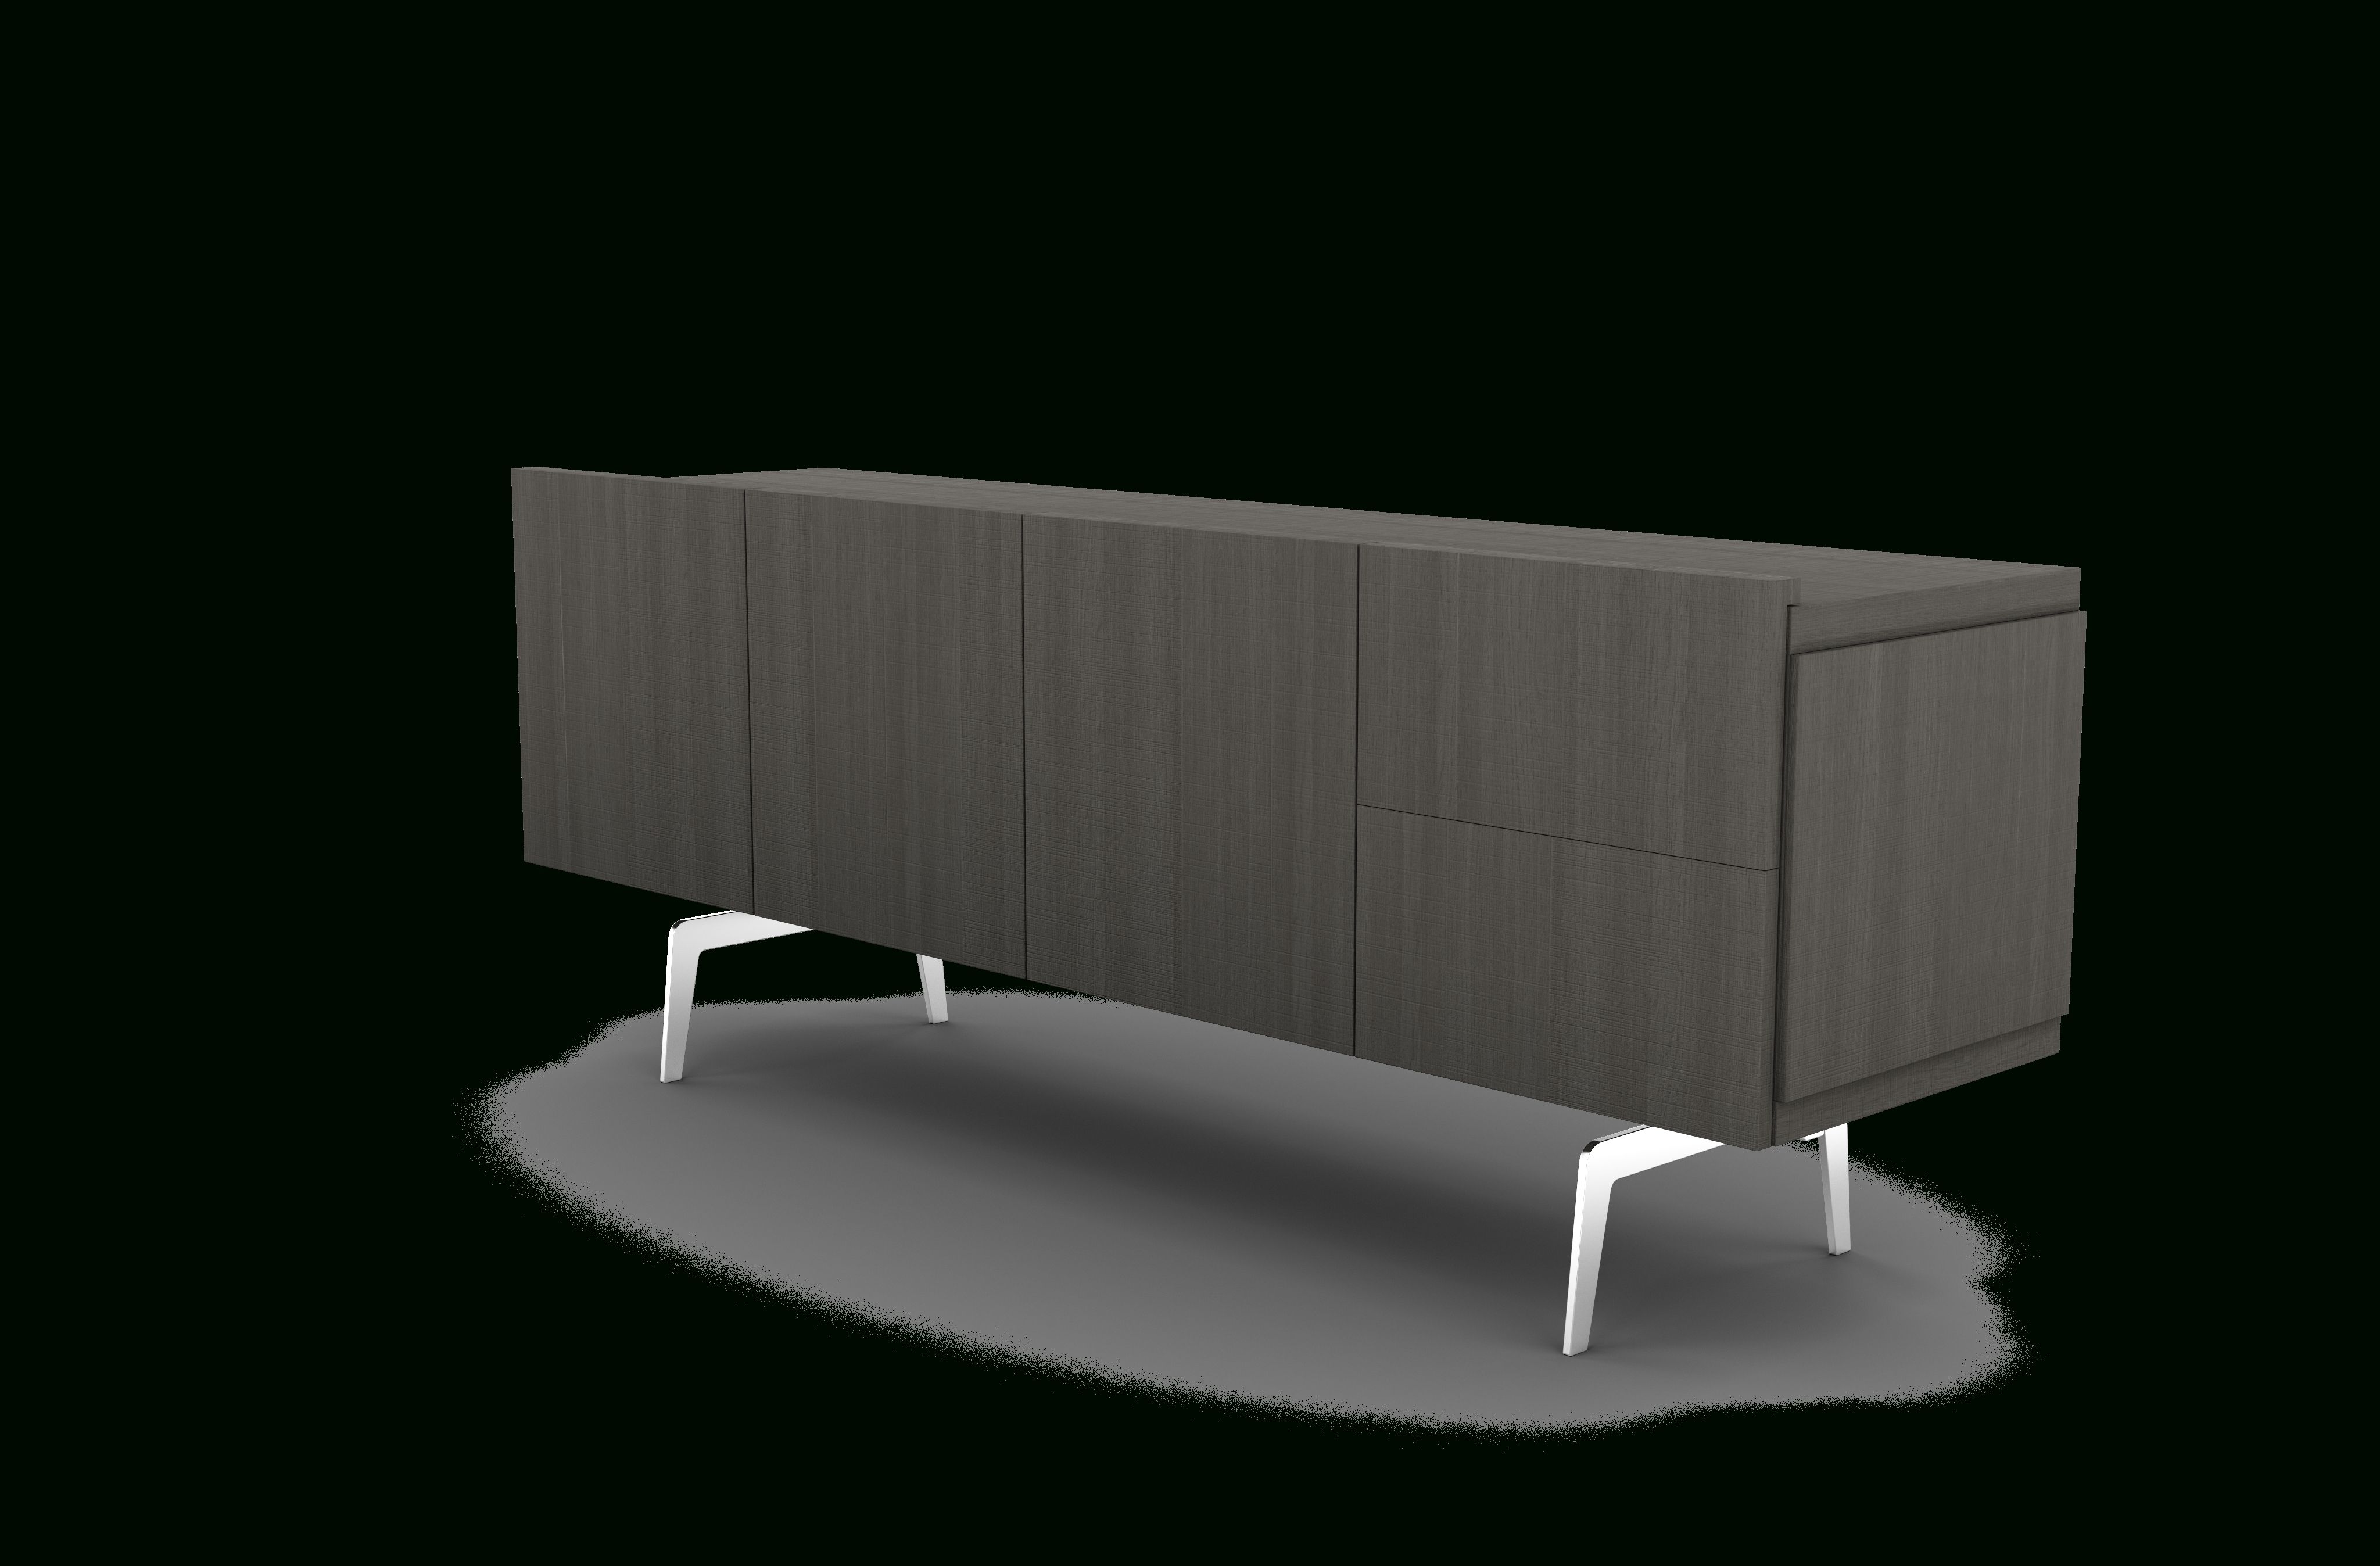 Mixte Living Room, Sideboards From Designer : Mauro Lipparini With Regard To 4 Door Wood Squares Sideboards (Photo 7 of 30)